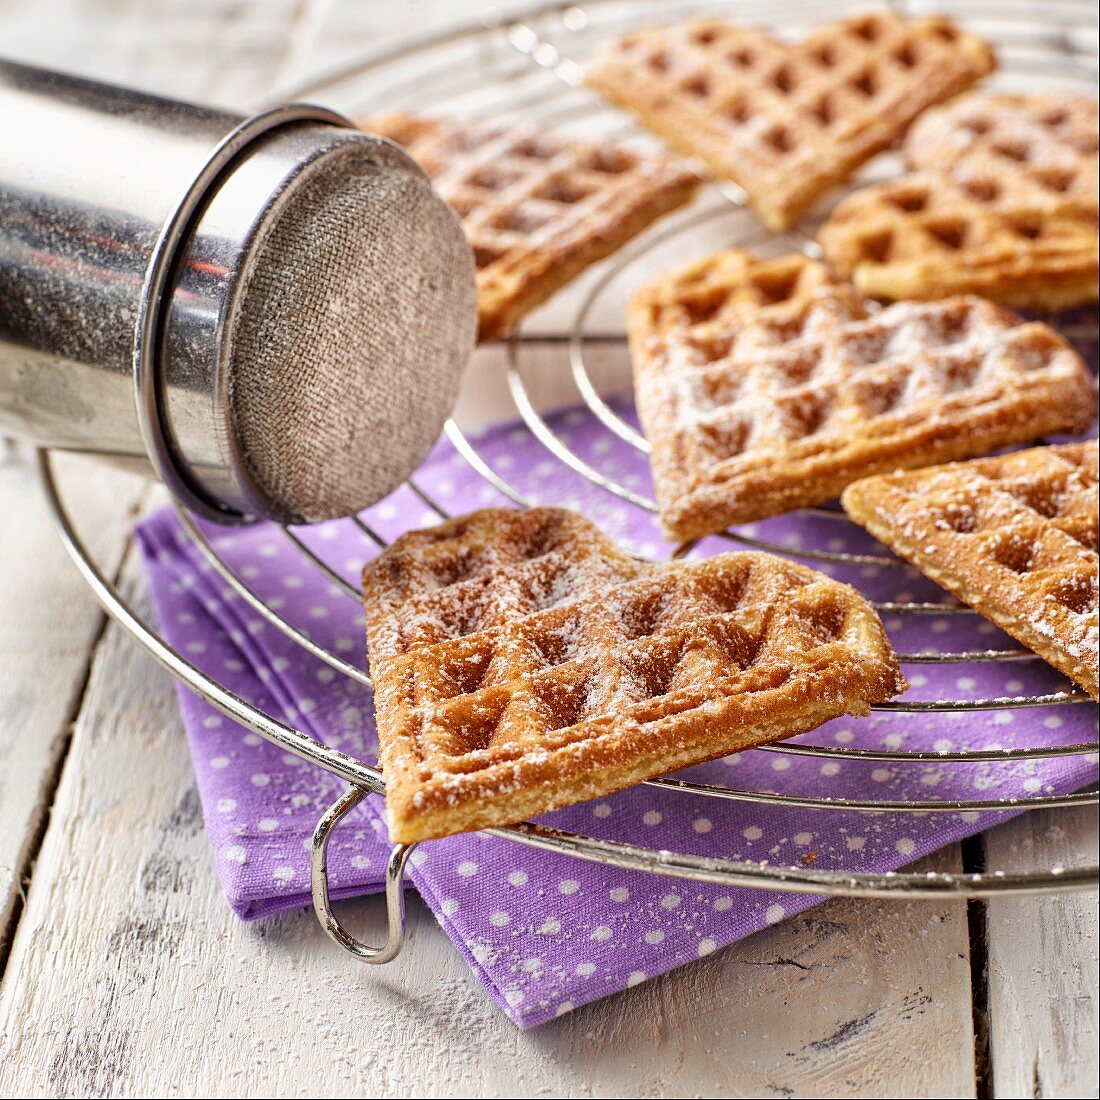 Heart-shaped waffles dusted with icing sugar on a wire rack